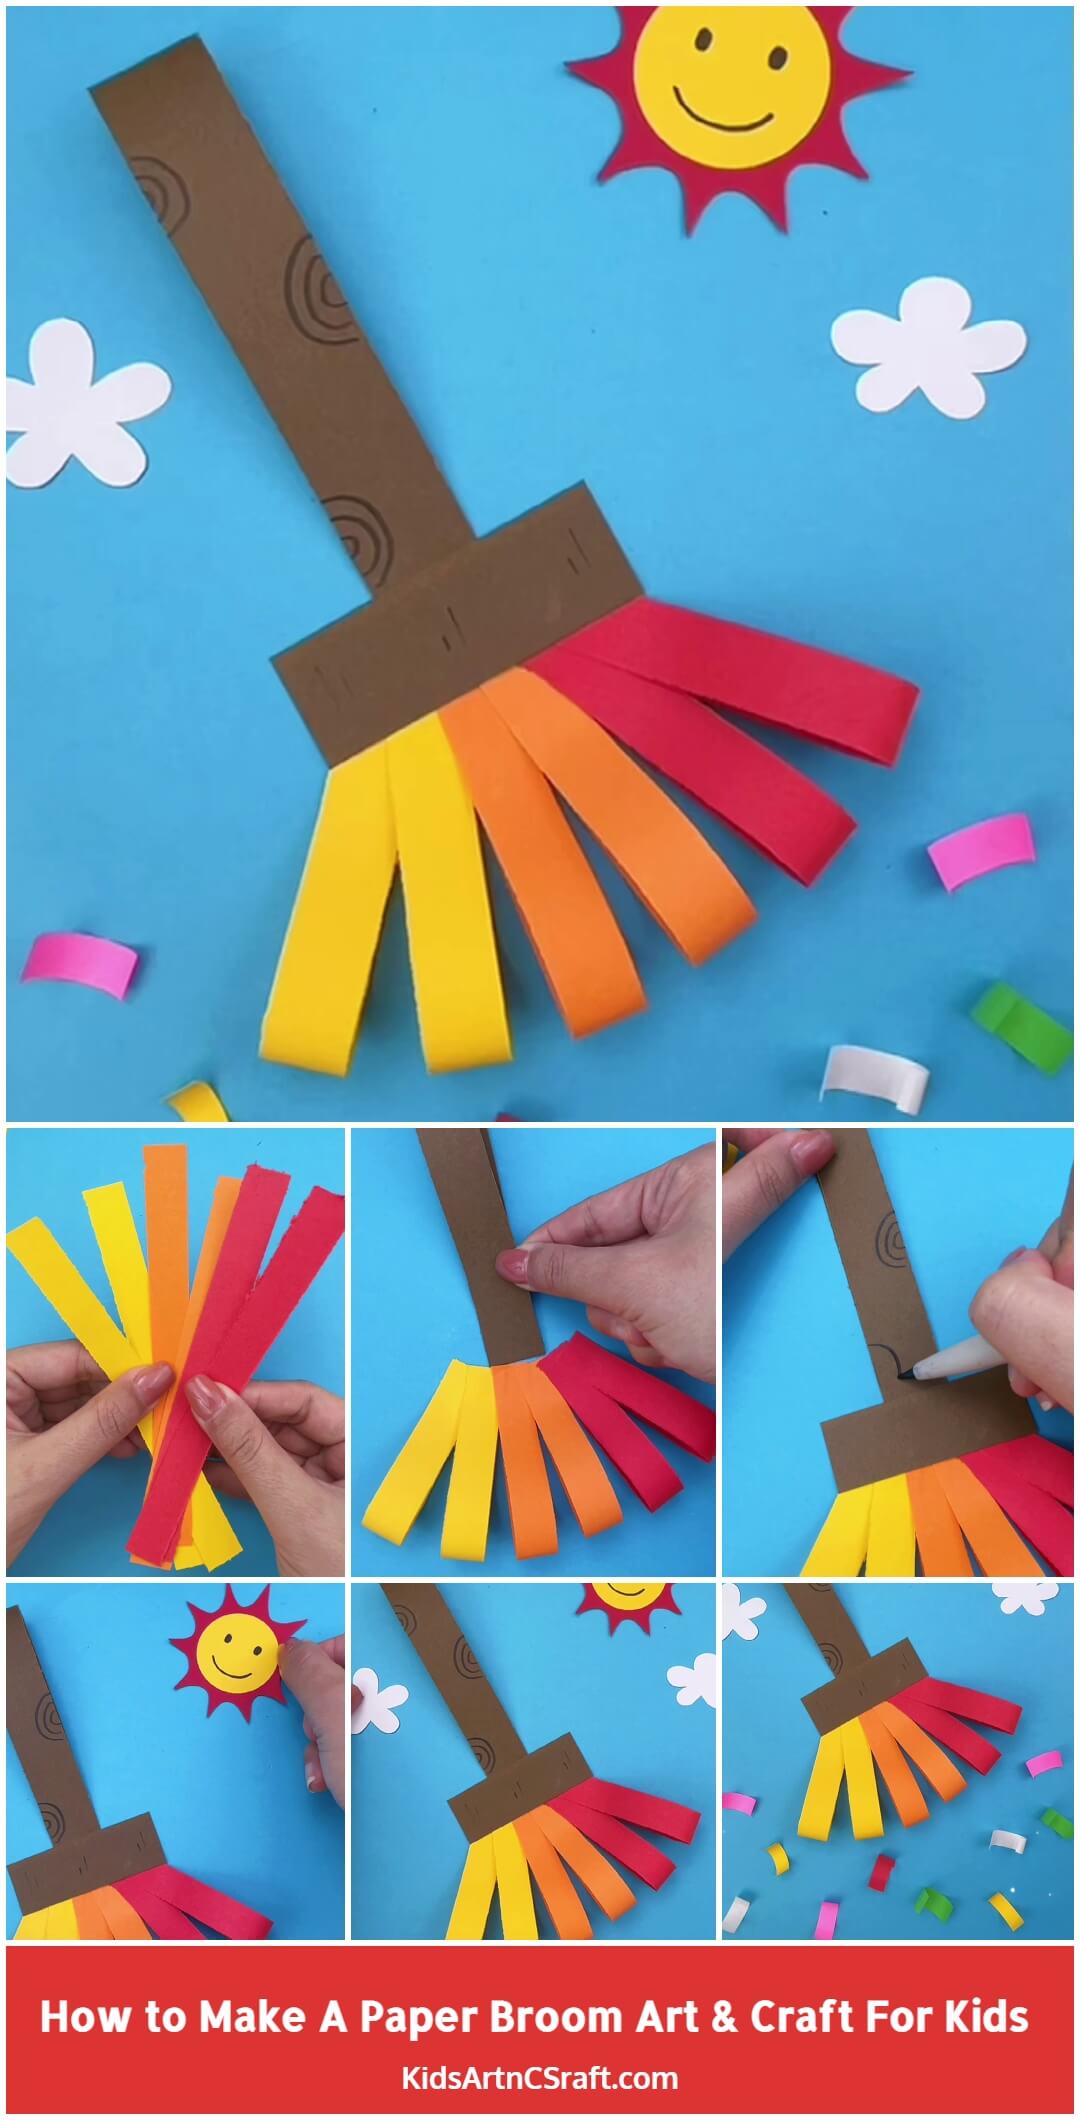 DIY How to Make A Paper Broom - Art and Craft for Kids Step by Step Tutorial